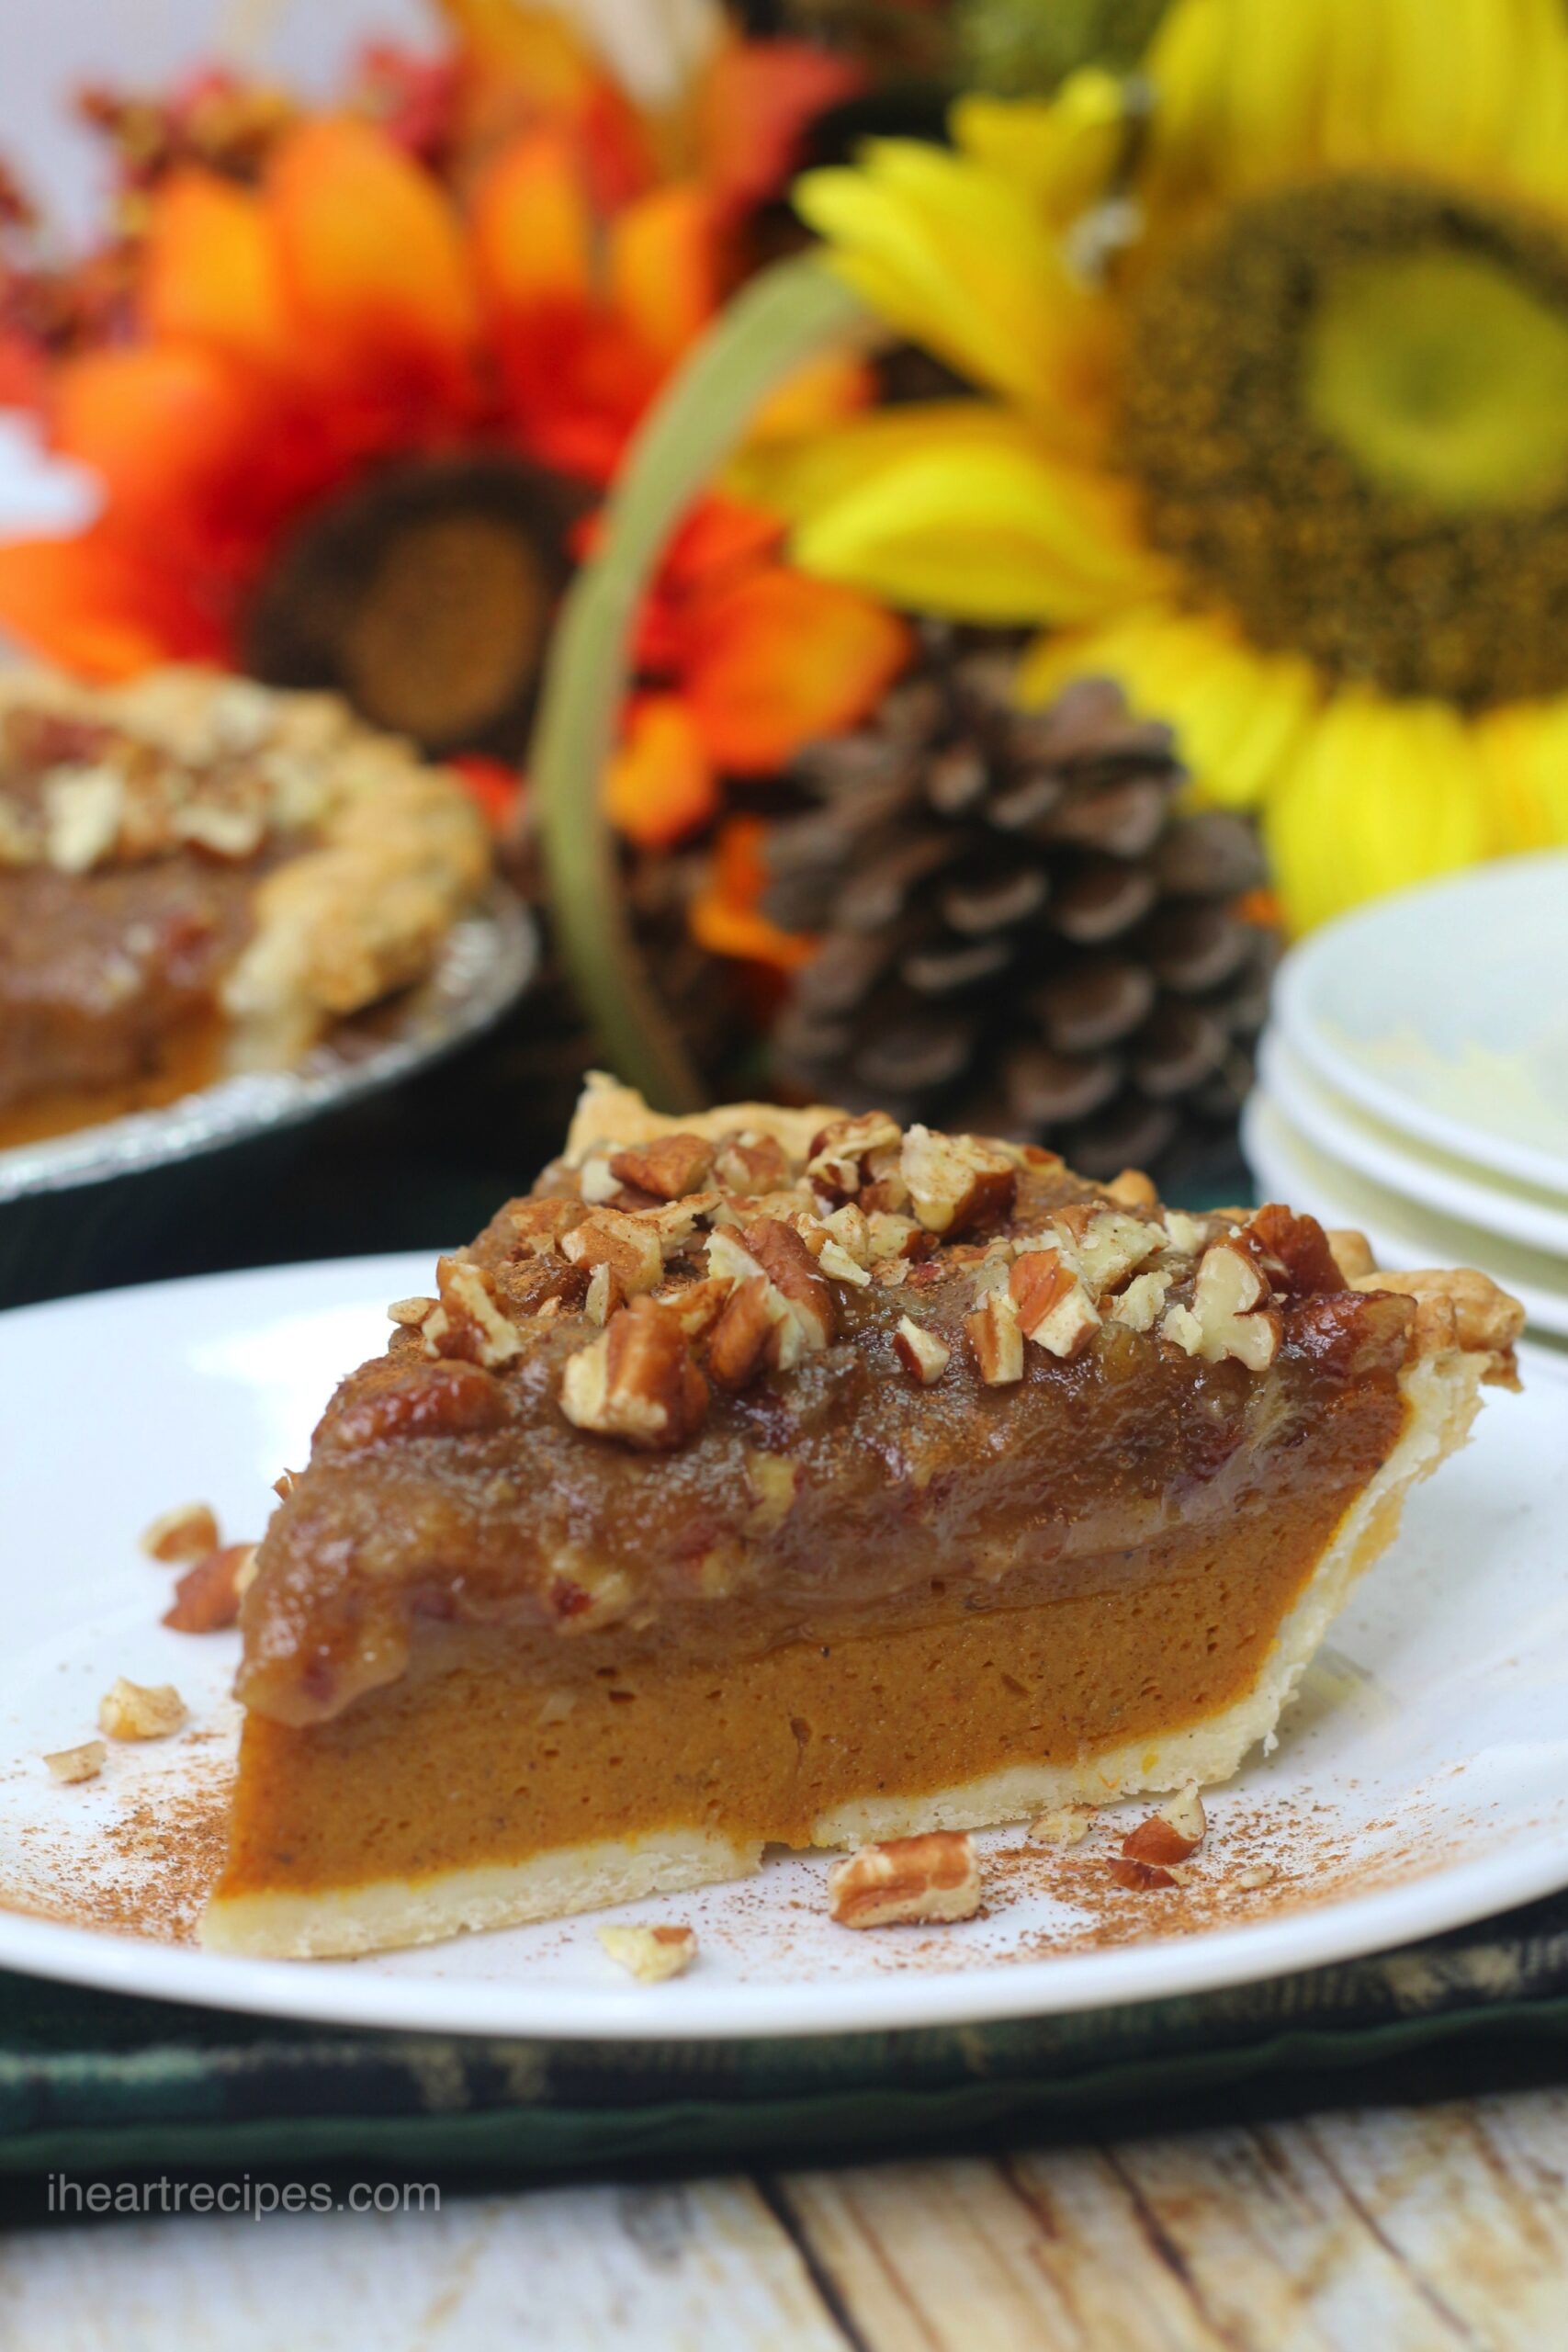 A close up image of a single slice of pecan pumpkin pie. The pie has a thin layer of pecan pie filling on top of a traditional pecan pie. Garnished with chopped pecans and ground cinnamon, the pie is served on a small white plate.